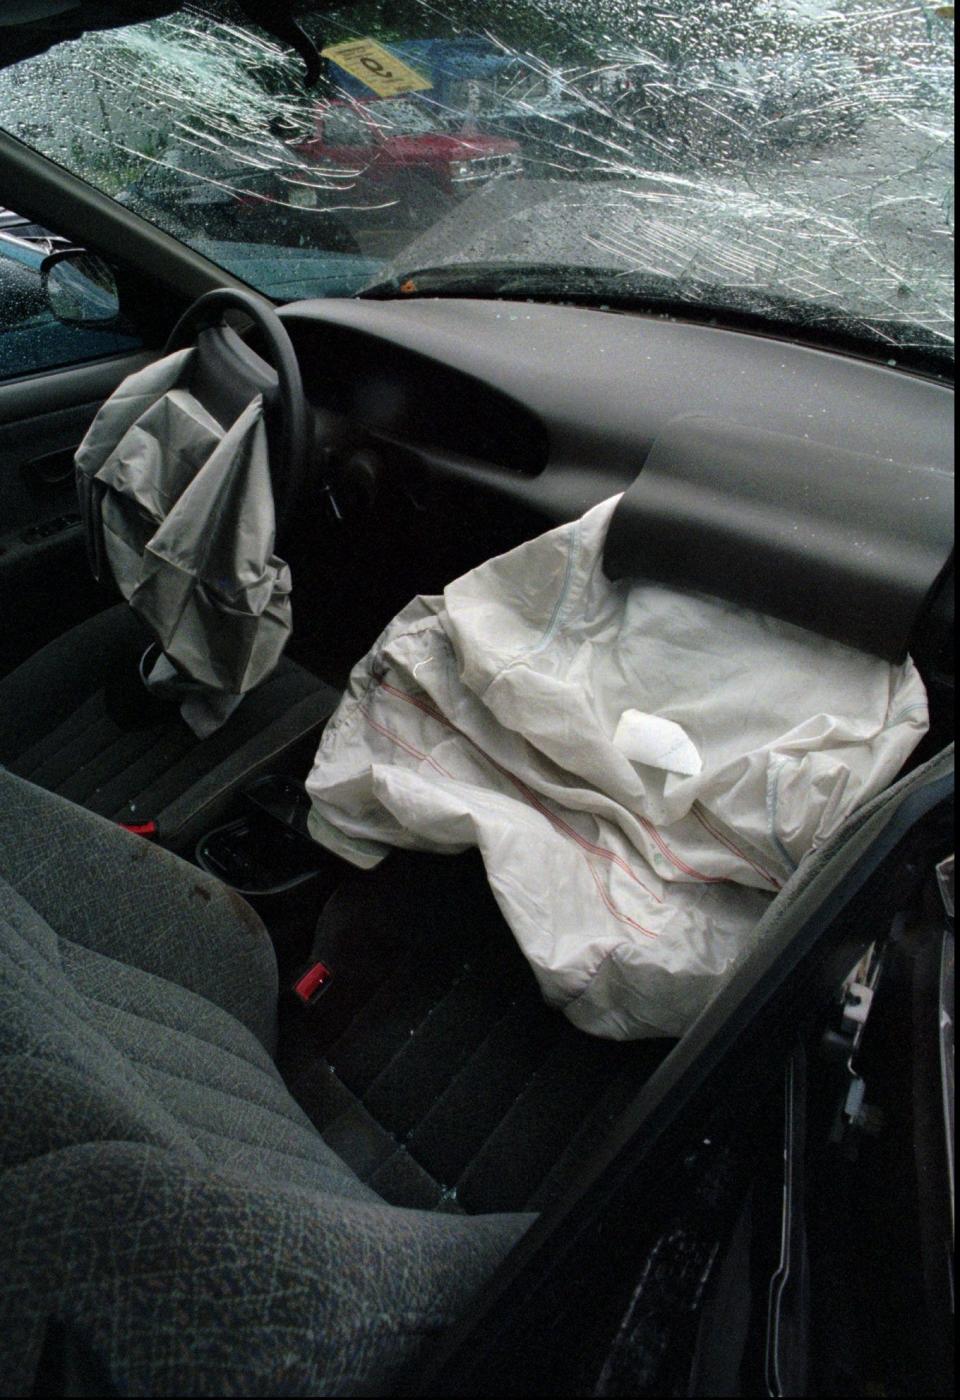 A deployed air bag is seen in a passenger seat Tuesday, Sept. 17, 1996 in Nashua, N.H. where 5-year-old Eduardo Cabrera of Nashua, N.H., was killed in an auto accident Friday. Police said the death should not have happened in what is considered a minor accident and that the deployed airbag may have been what broke Cabrera's neck. Thousands of times a day in America a potentially deadly drama is played out, a combination of kids, cars, airbags and improperly installed child seats are a dangerous mix that worries the National Transportation Safety Board.